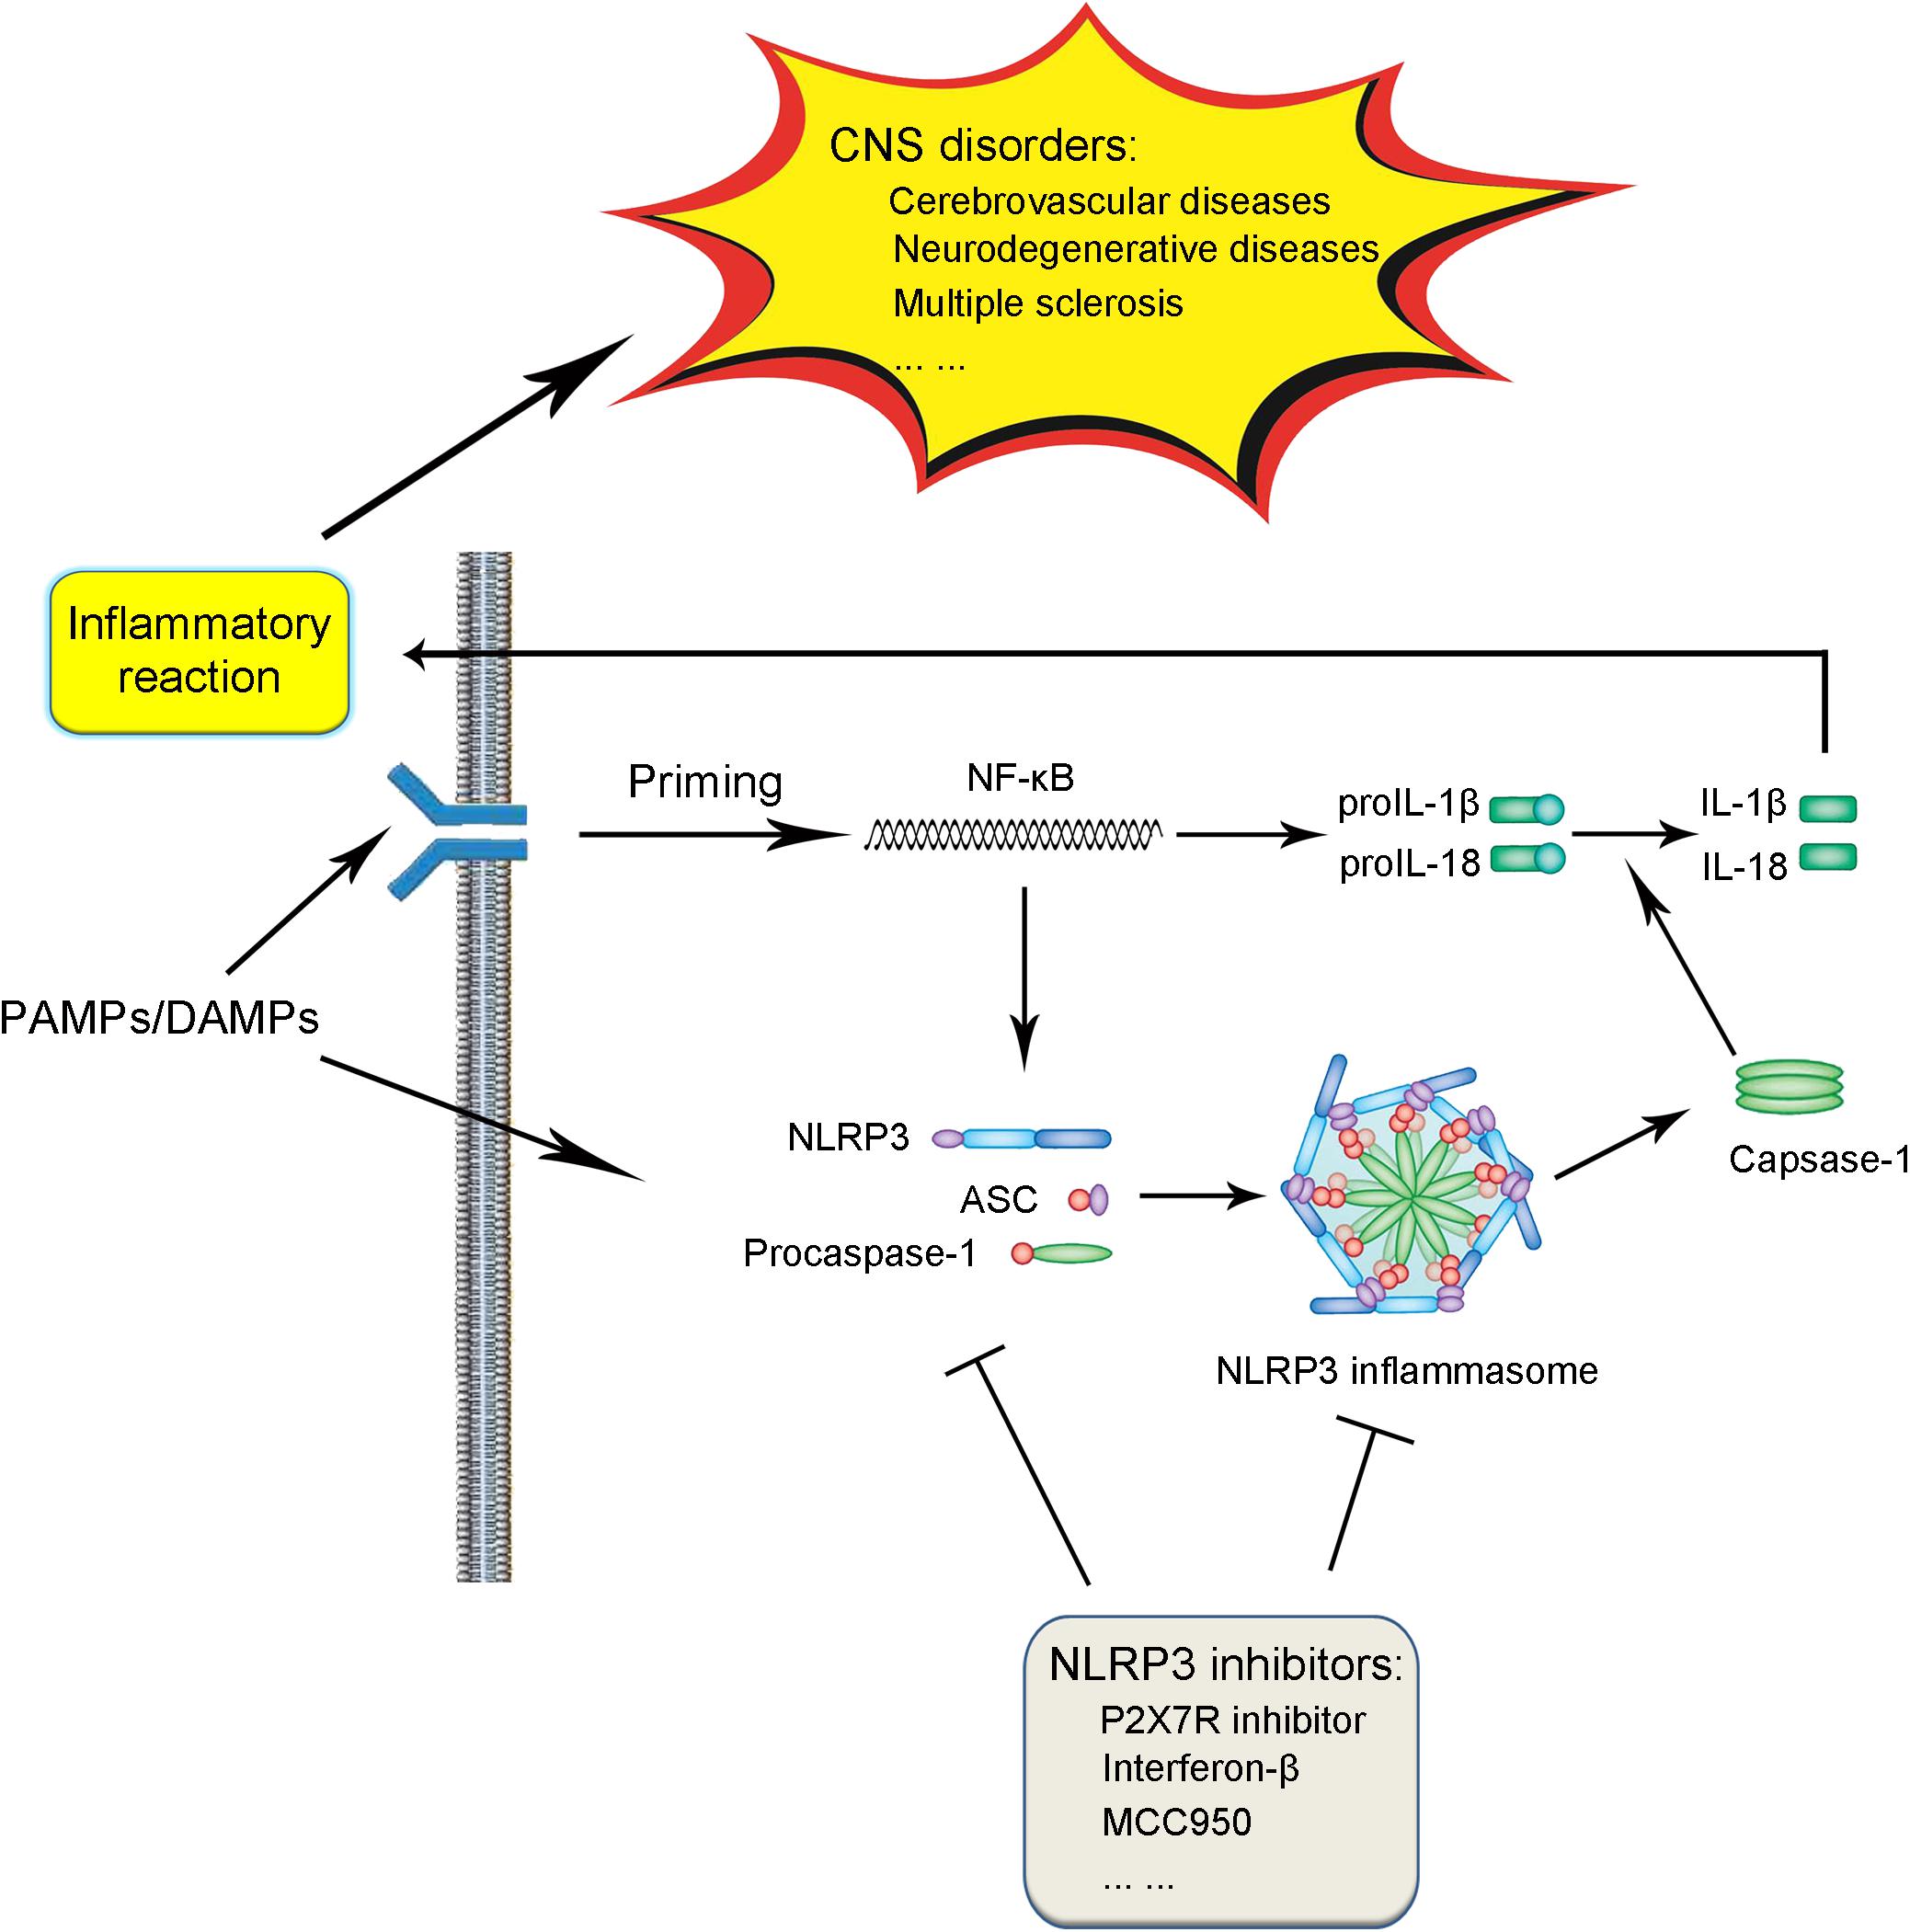 Frontiers Targeting Nlrp3 Inflammasome In The Treatment Of Cns Diseases Molecular Neuroscience